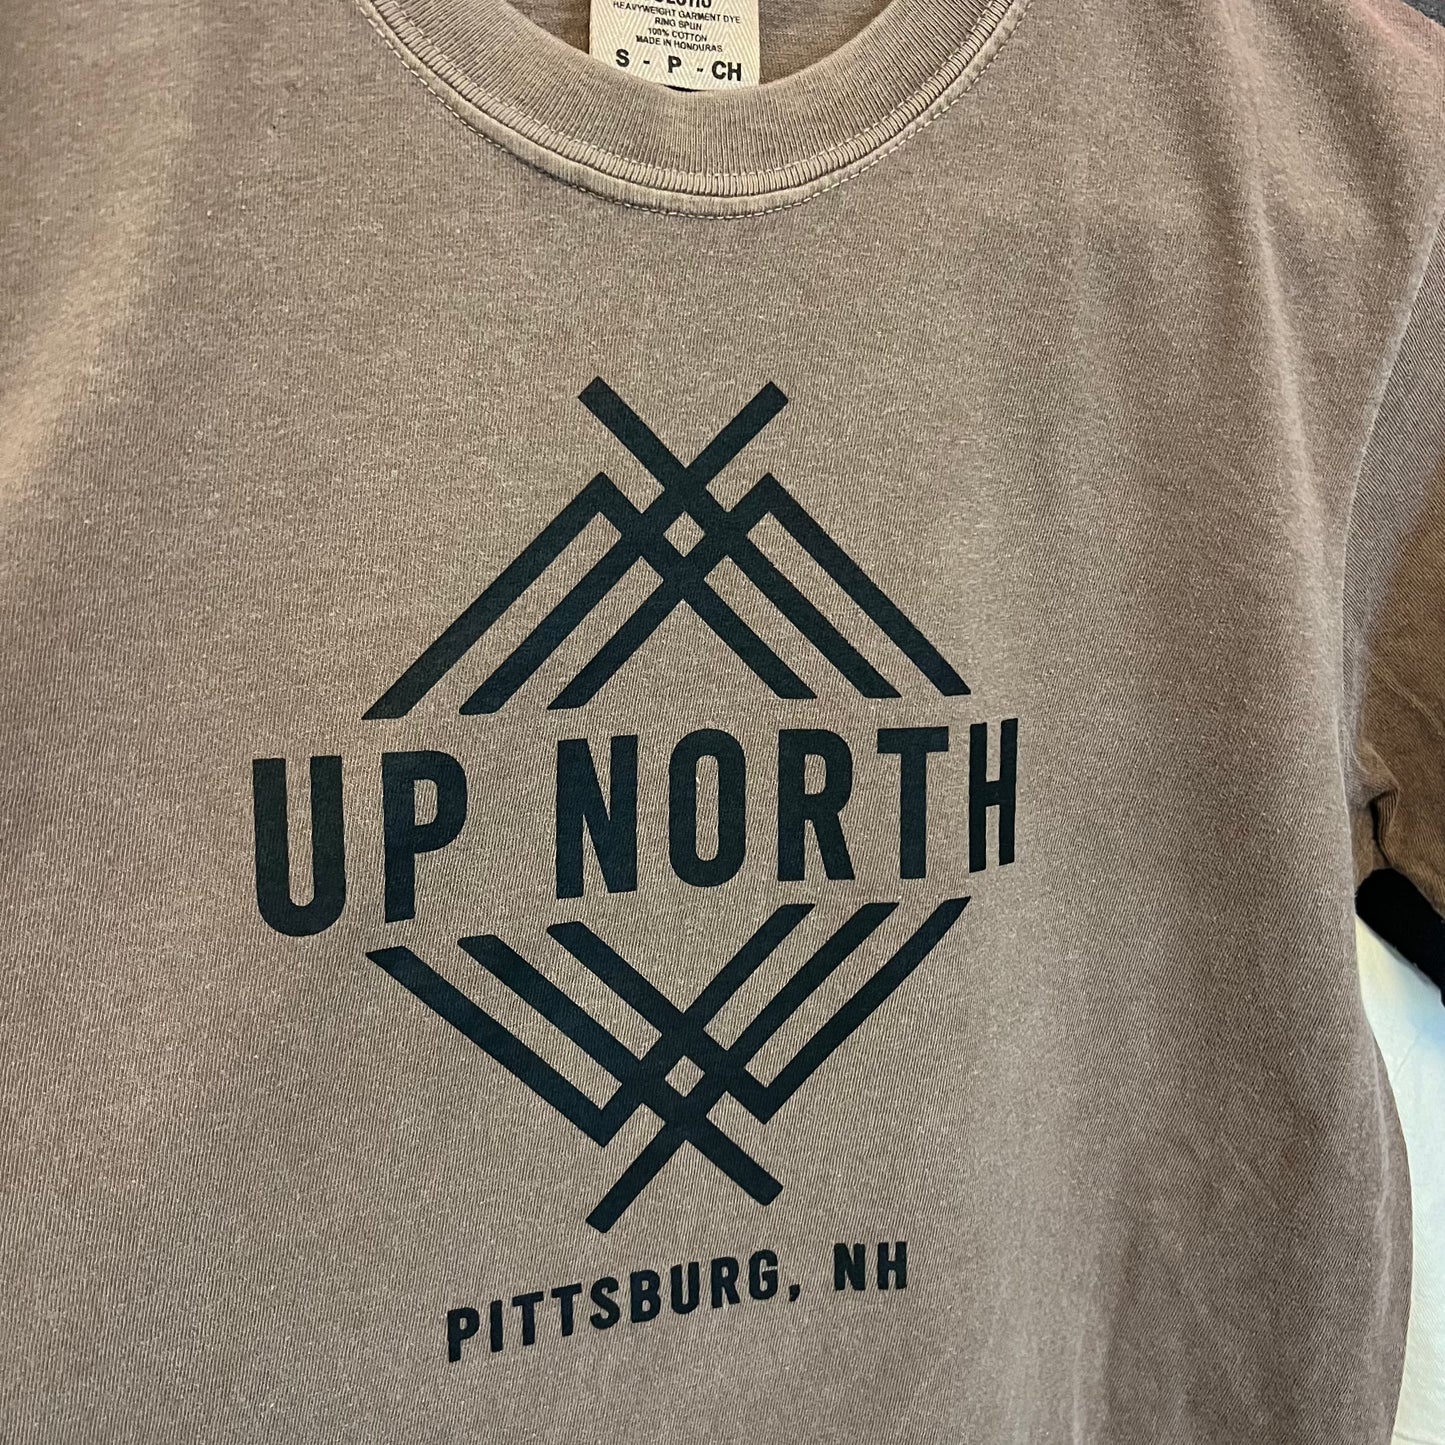 Up North Logo Tee - Garment Dyed Brown